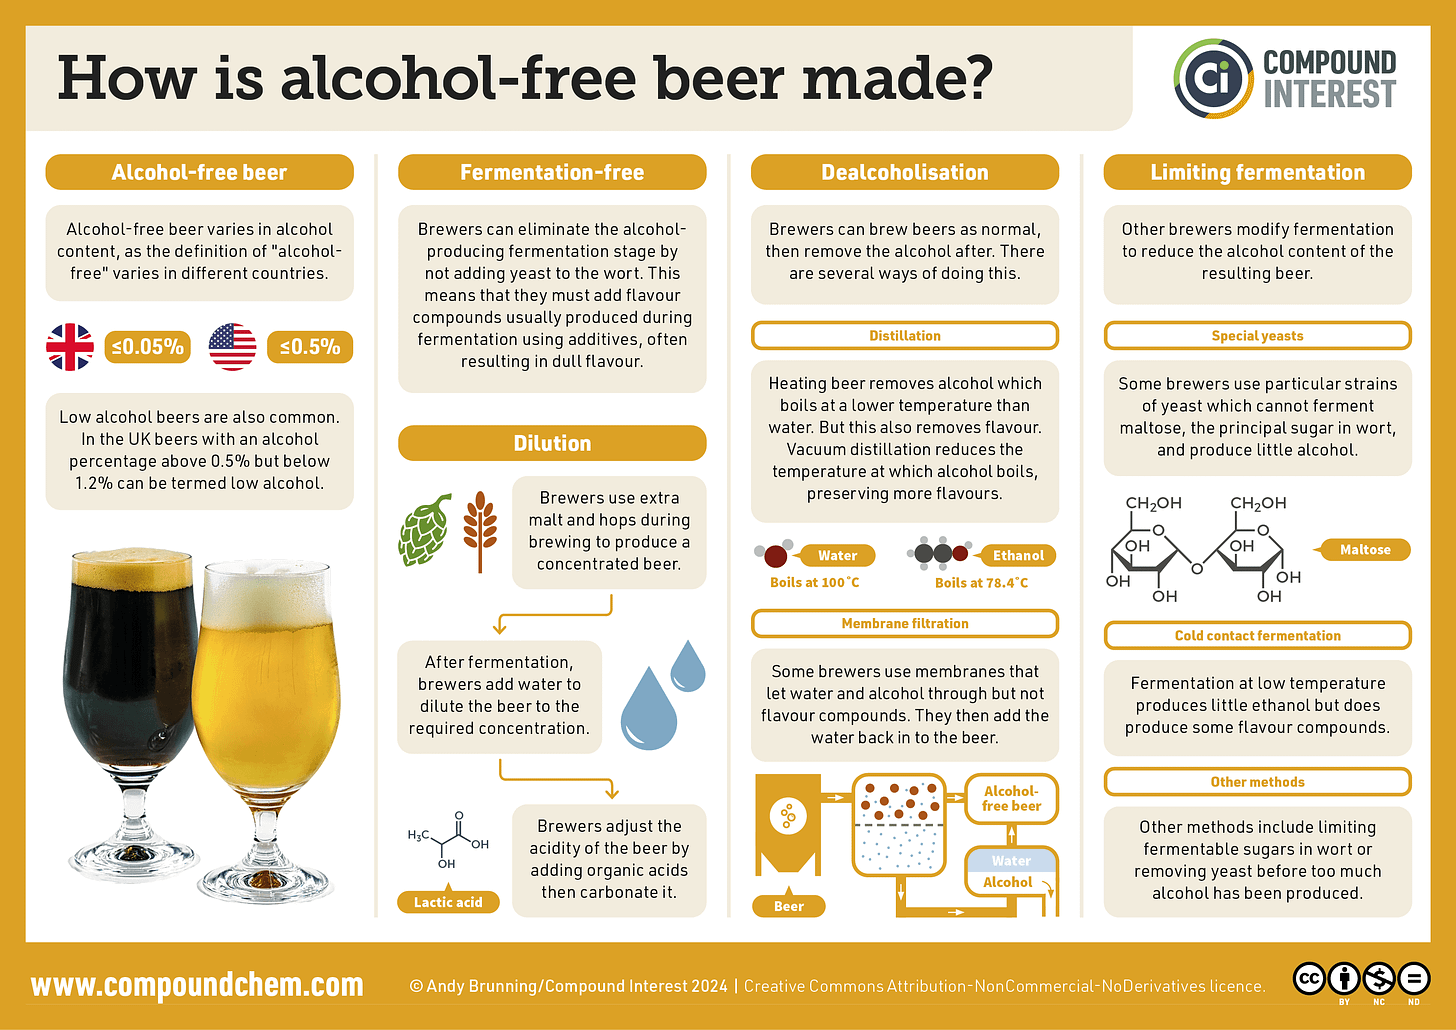 Infographic on how alcohol-free beer is made. Definitions of alcohol-free beer vary in different countries, with some allowing small amounts of alcohol. Alcohol-free beers can be produced by avoiding fermentation entirely, but this can impact flavour. More common methods include dilution (where a concentrated beer is produced then diluted), dealcoholisation (where alcohol is removed via distillation or membrane filtration) or limiting the production of alcohol (by using specialised yeast or low fermenting temperatures).